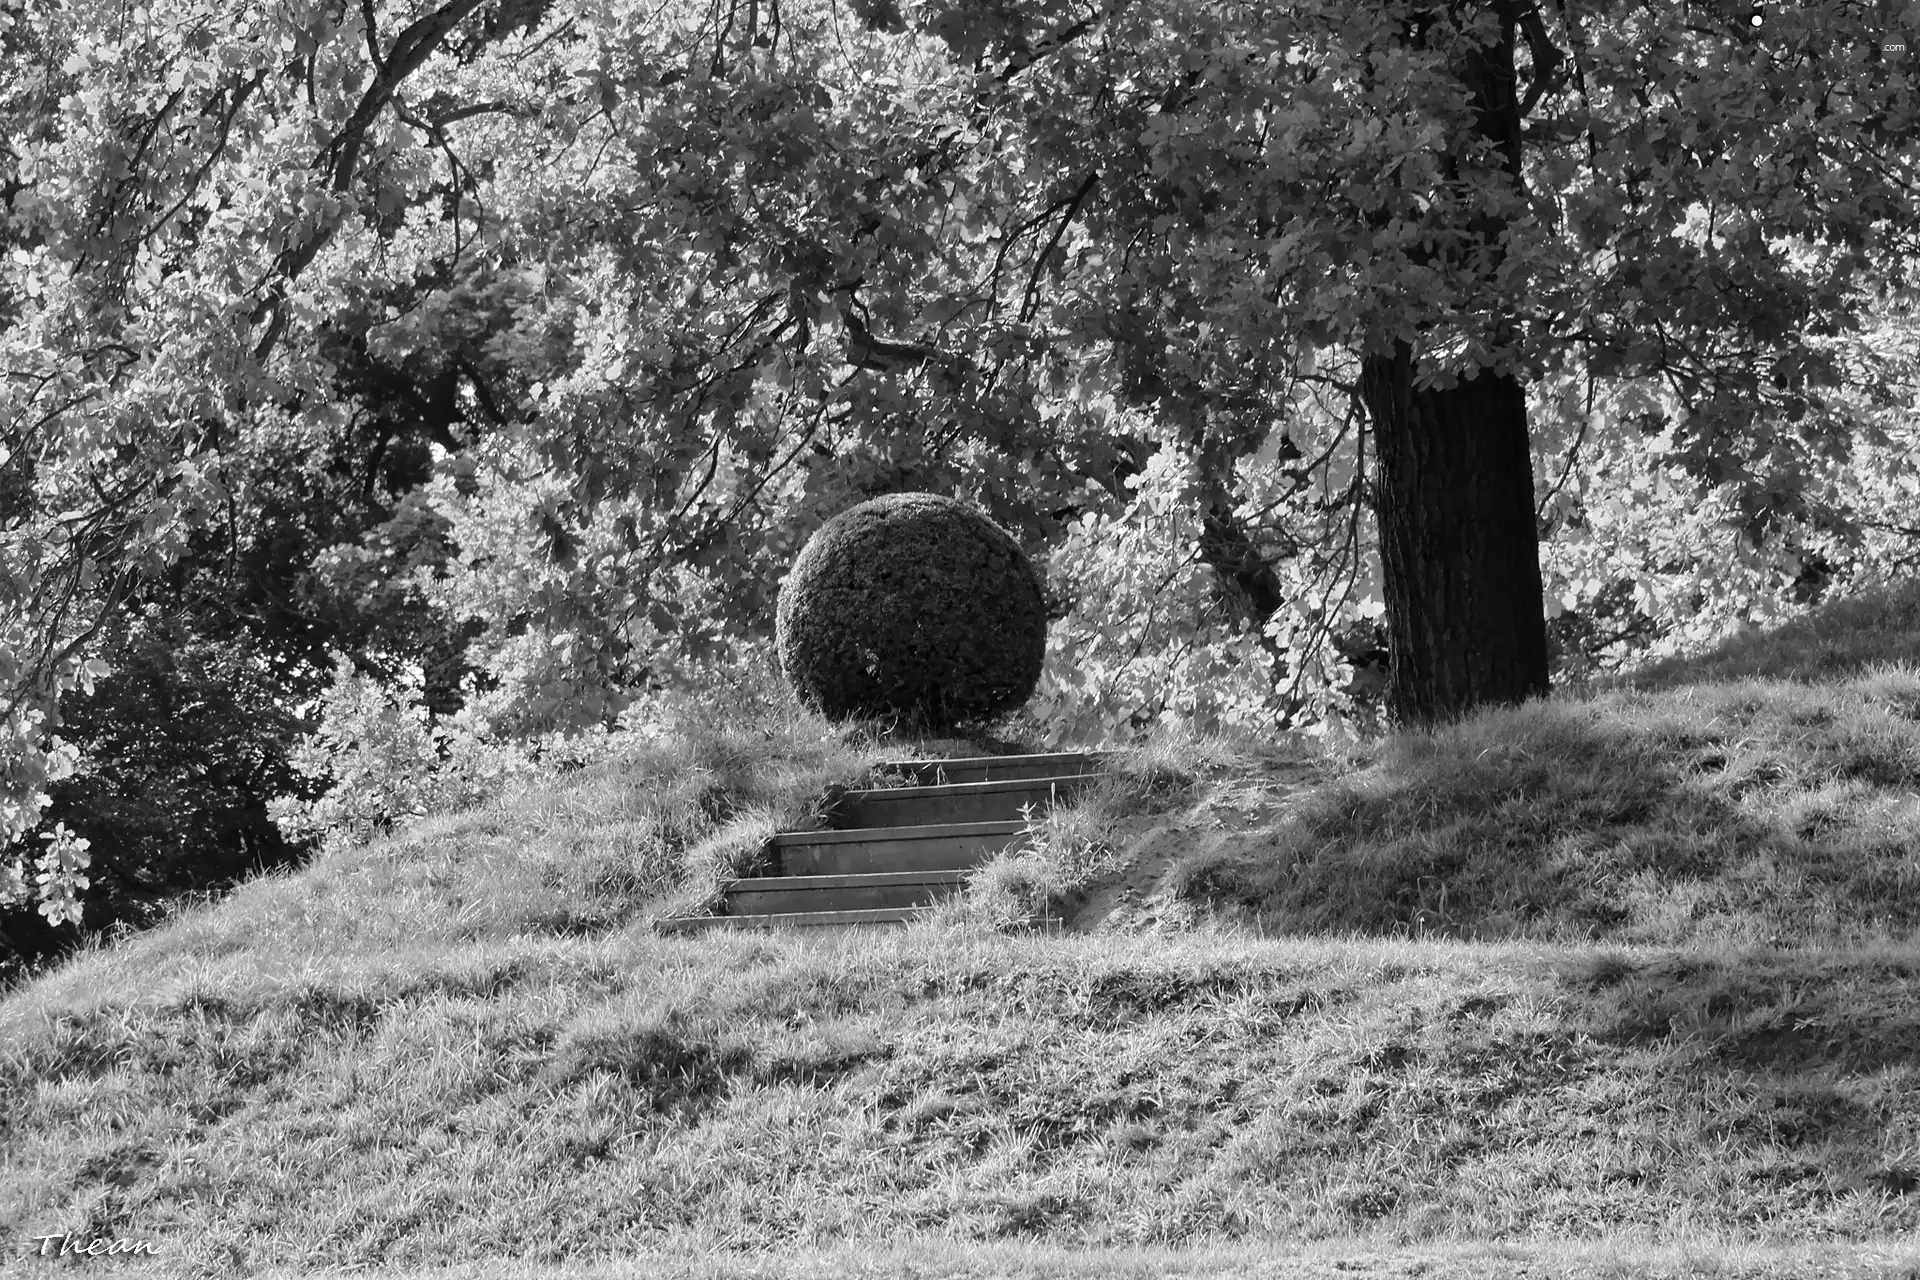 viewes, Park, Stone, Stairs, grass, trees